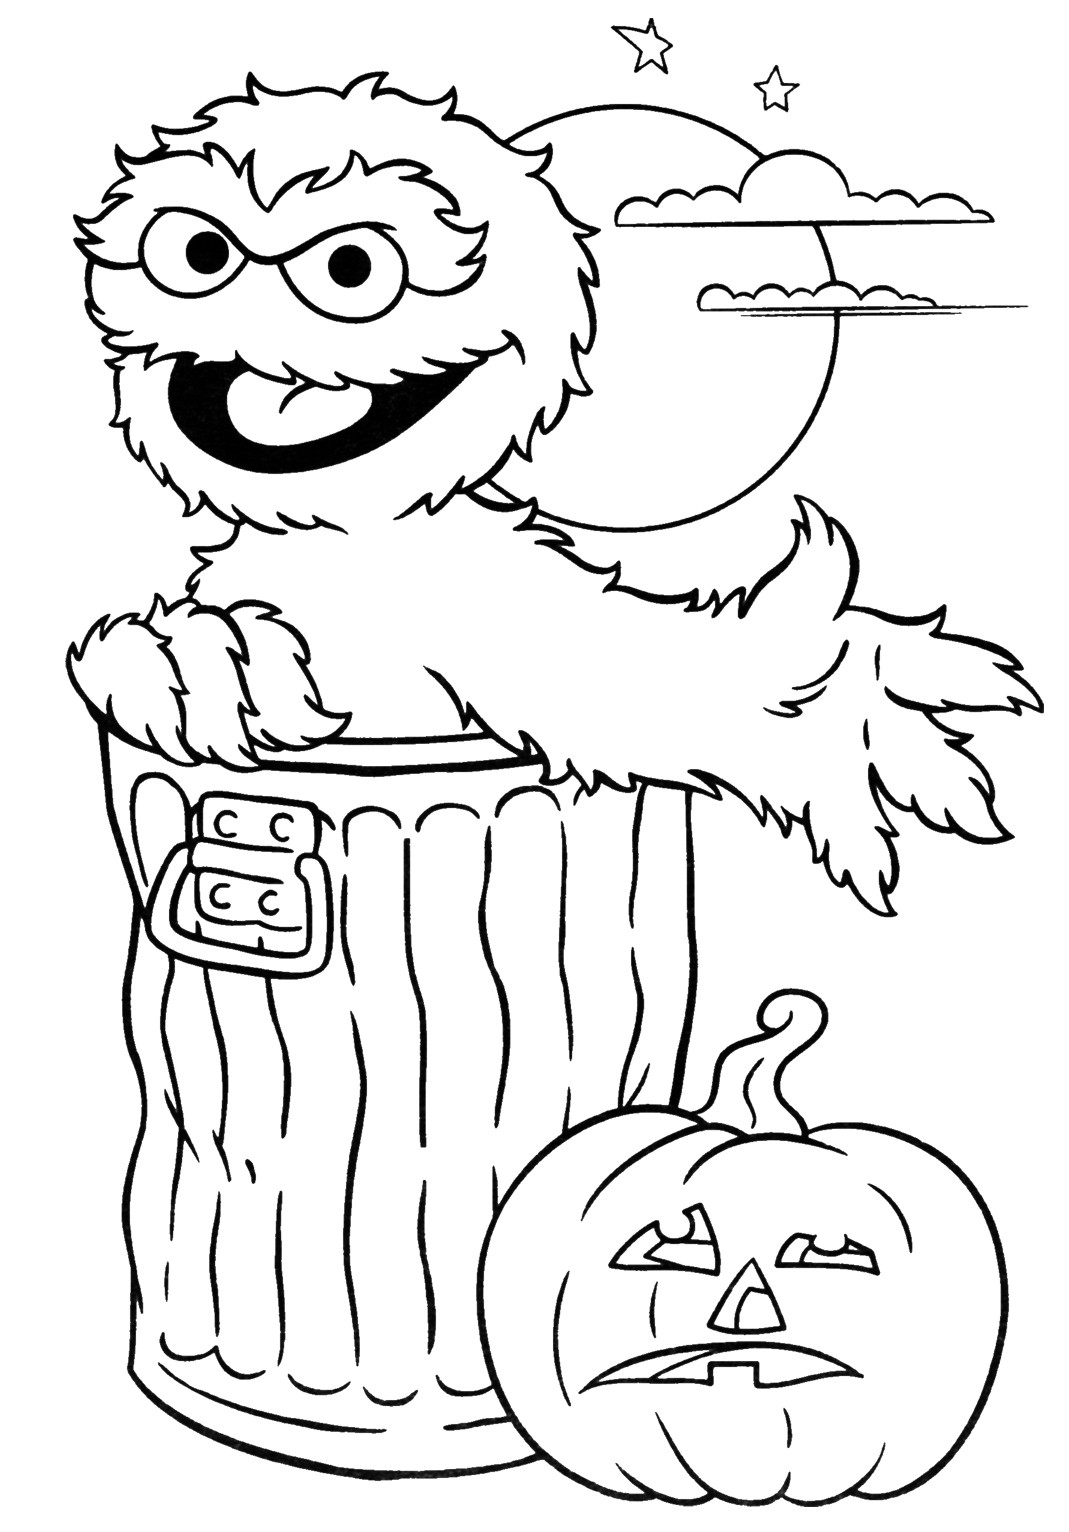 Coloring Pages For Halloween Printable
 Halloween Printable Coloring Pages Minnesota Miranda